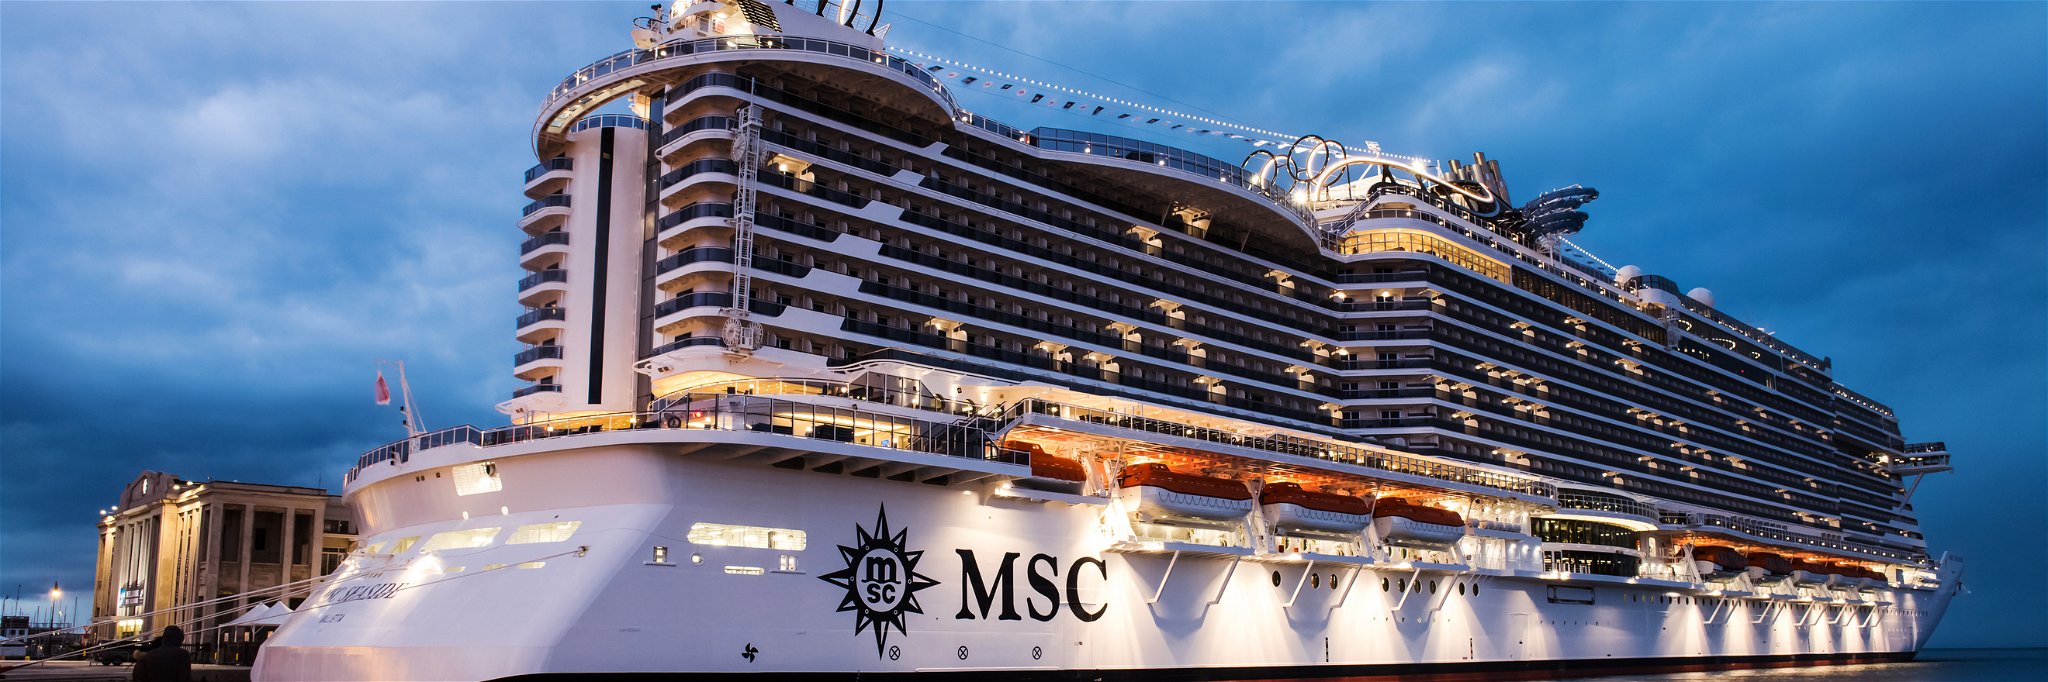 One of MSC Cruises's ships